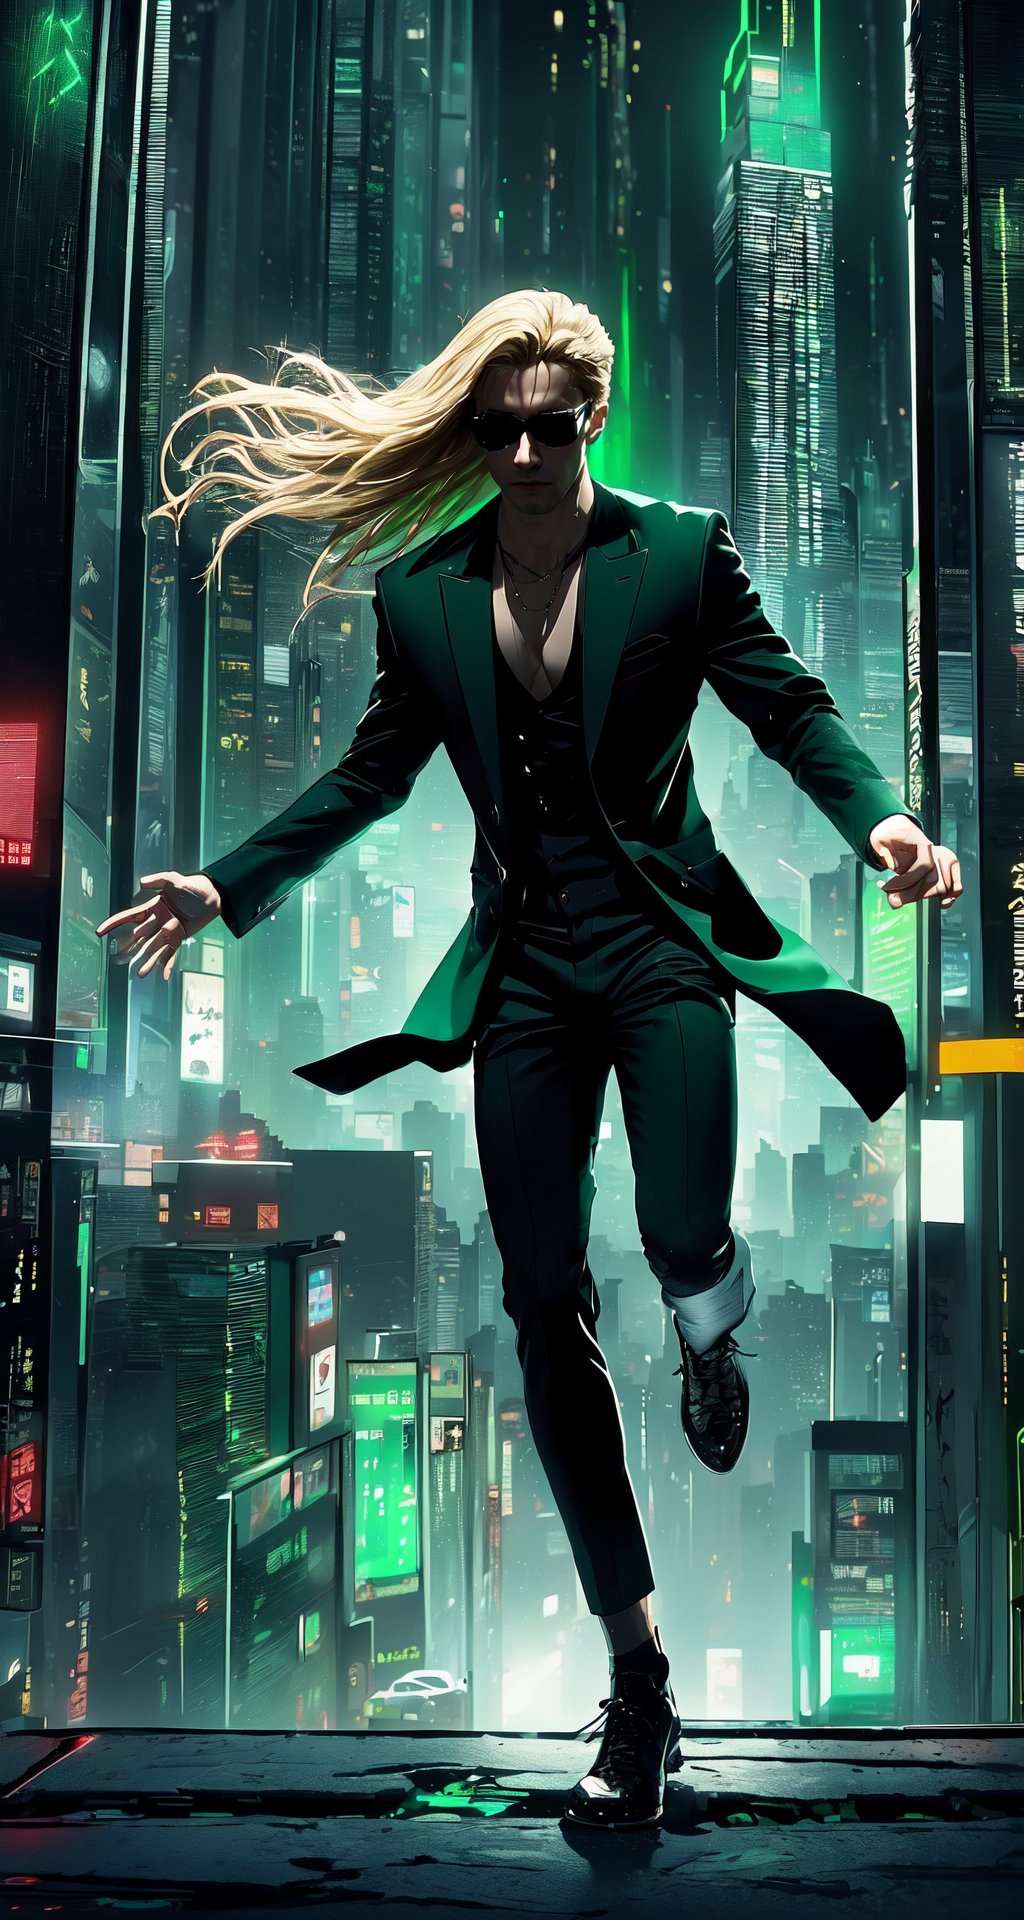 Master masterpiece, high-definition picture quality, matrix style, Matrix, gorgeous movements, ((1boy)), the correct body proportion, black glasses, blonde hair, city, green, floating, all-black suit, dark night, buildings, Code matrix cascading from top to bottom,1 girl,Cyberpunk